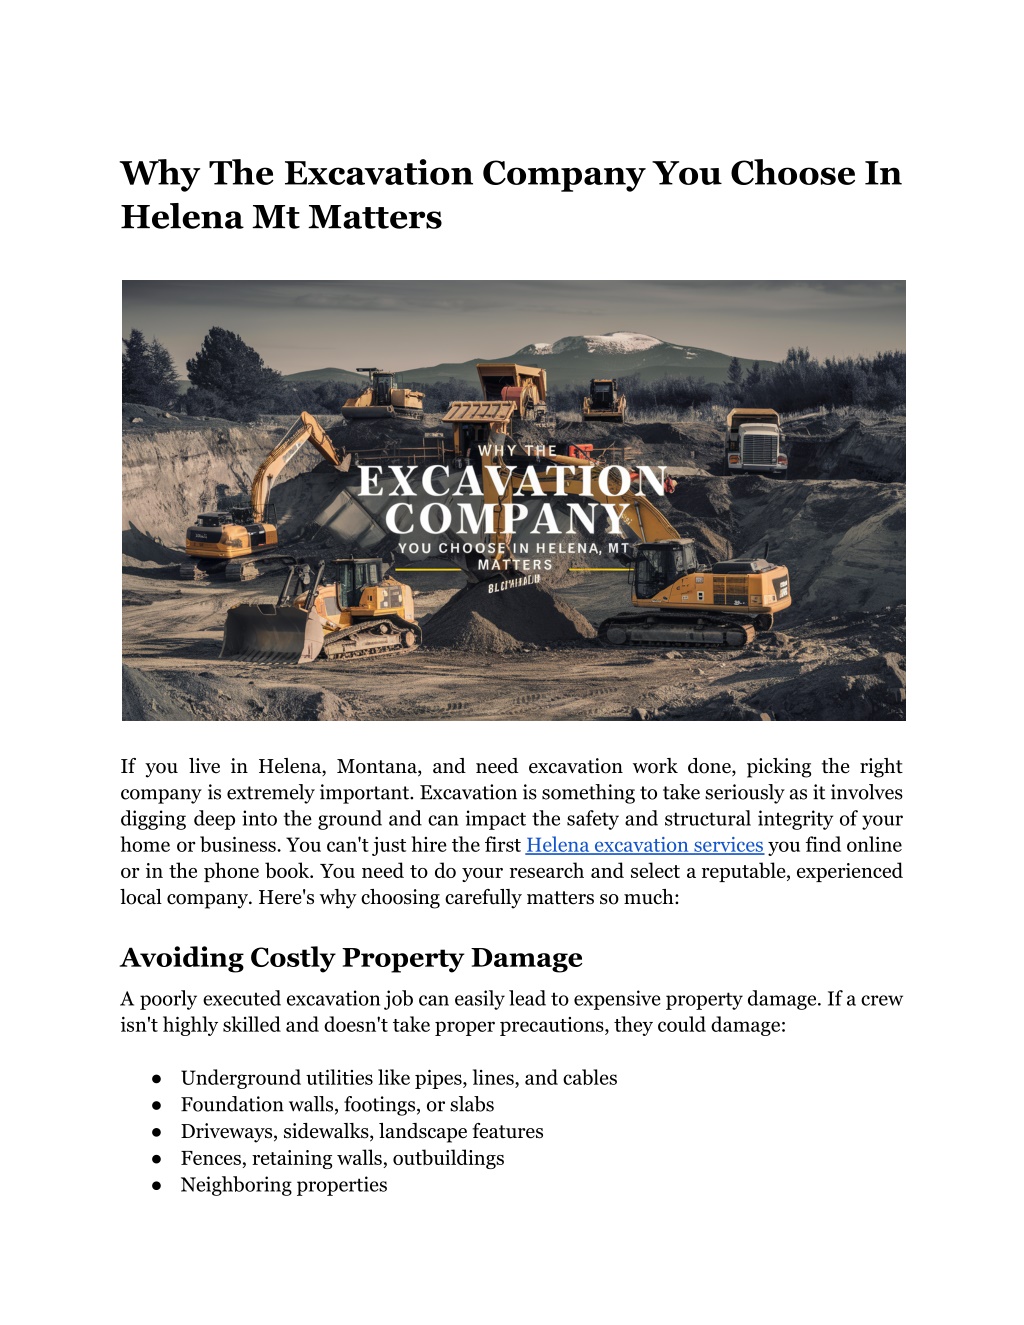 why the excavation company you choose in helena l.w